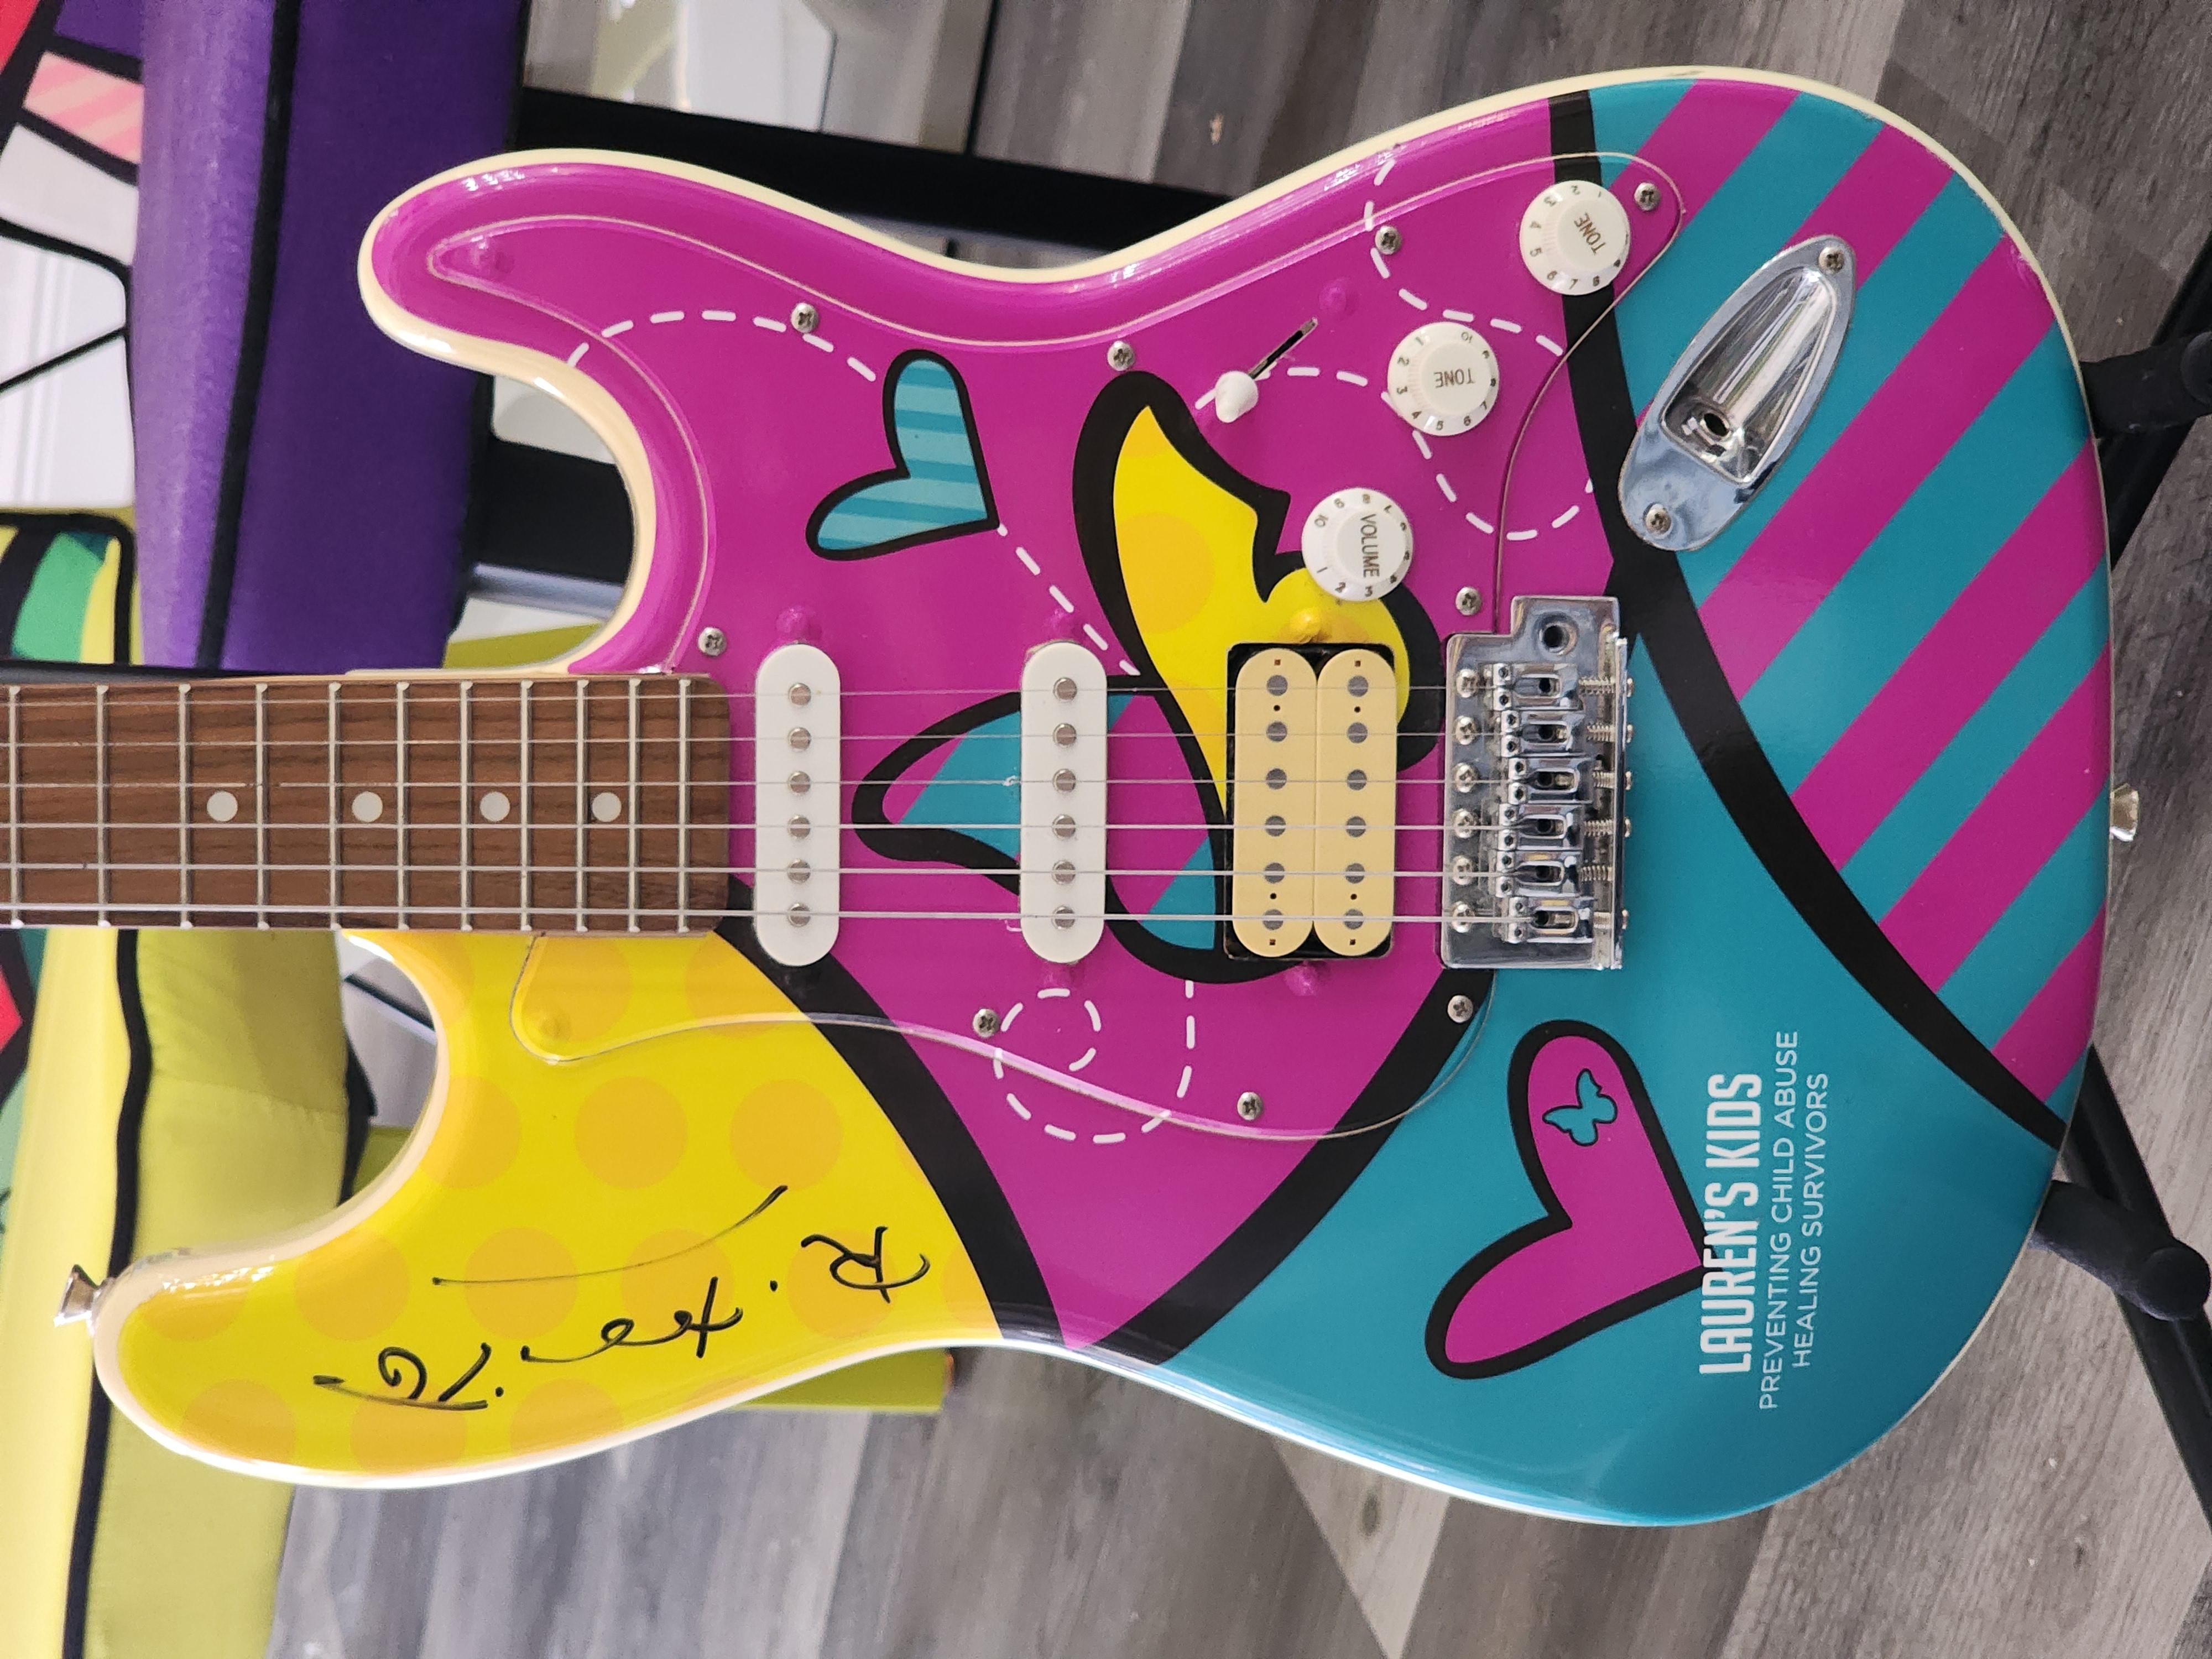 Artist: Romero Britto
Signed one of a kind, 'Glen Burton' electric guitar by BGuitars. The guitar helped to raise 1M dollars for Lauren's kids foundation - An organization that educates adults and children to prevent sexual abuse and heal survivors.